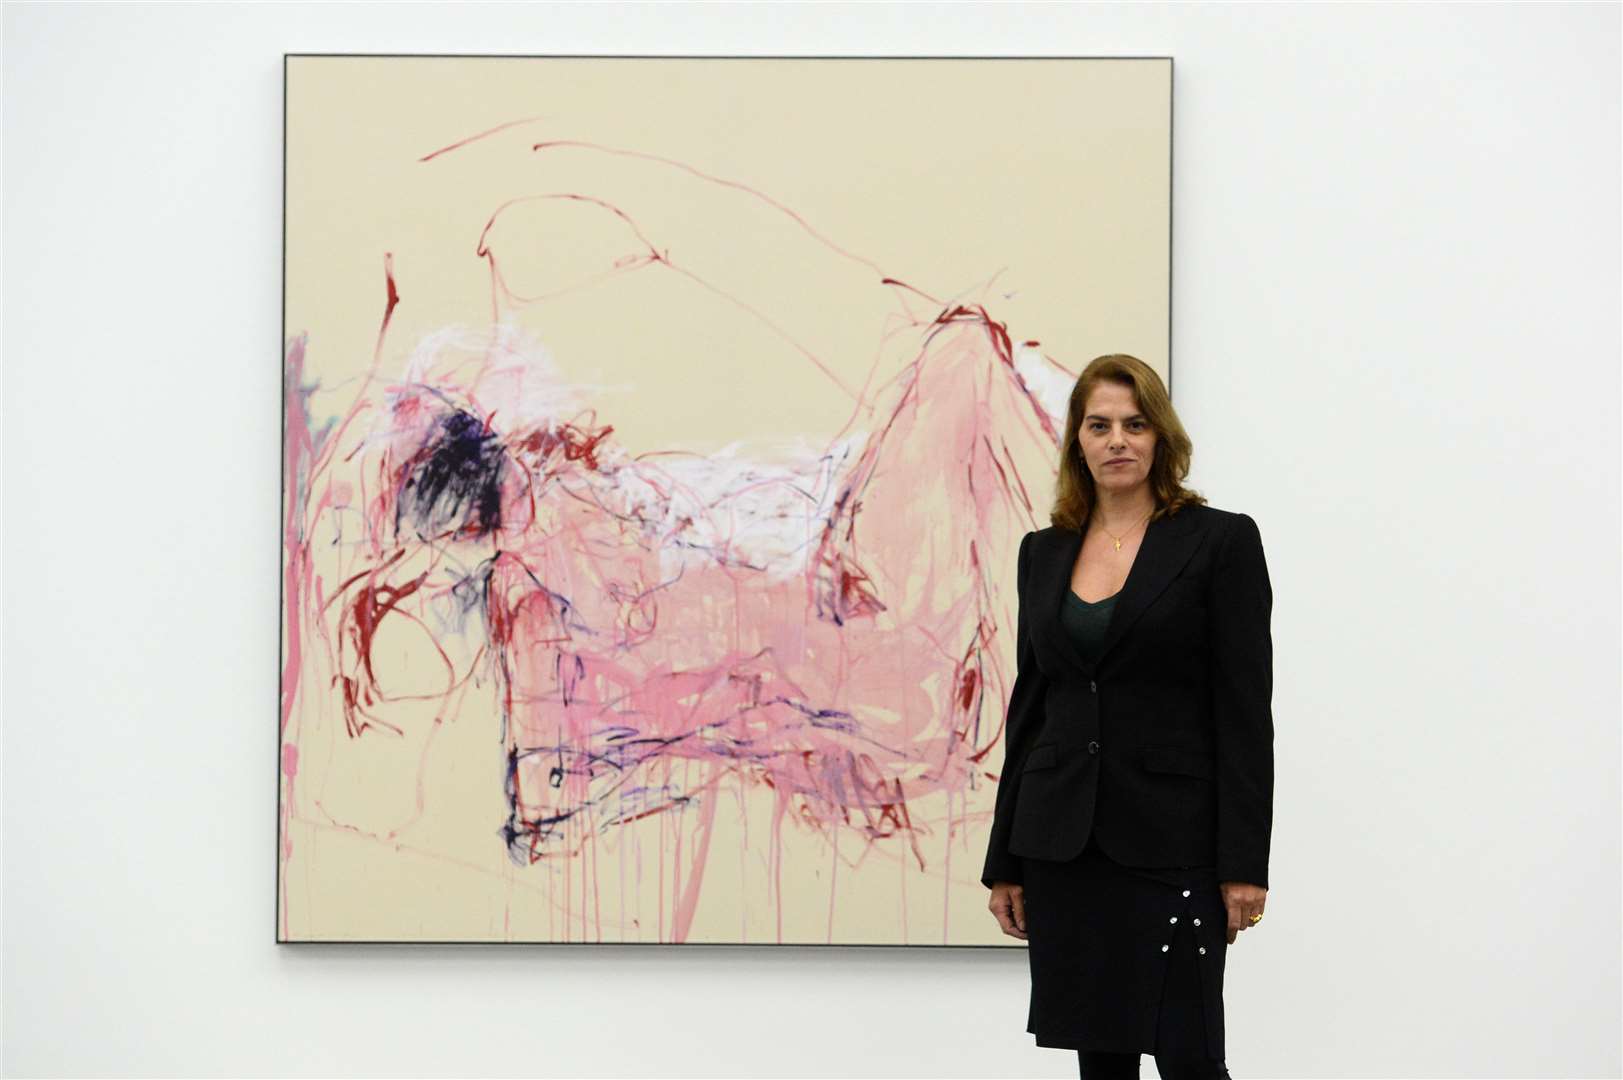 Tracey Emin said she could ‘deal’ with her cancer diagnosis (Kirsty O’Connor/PA)